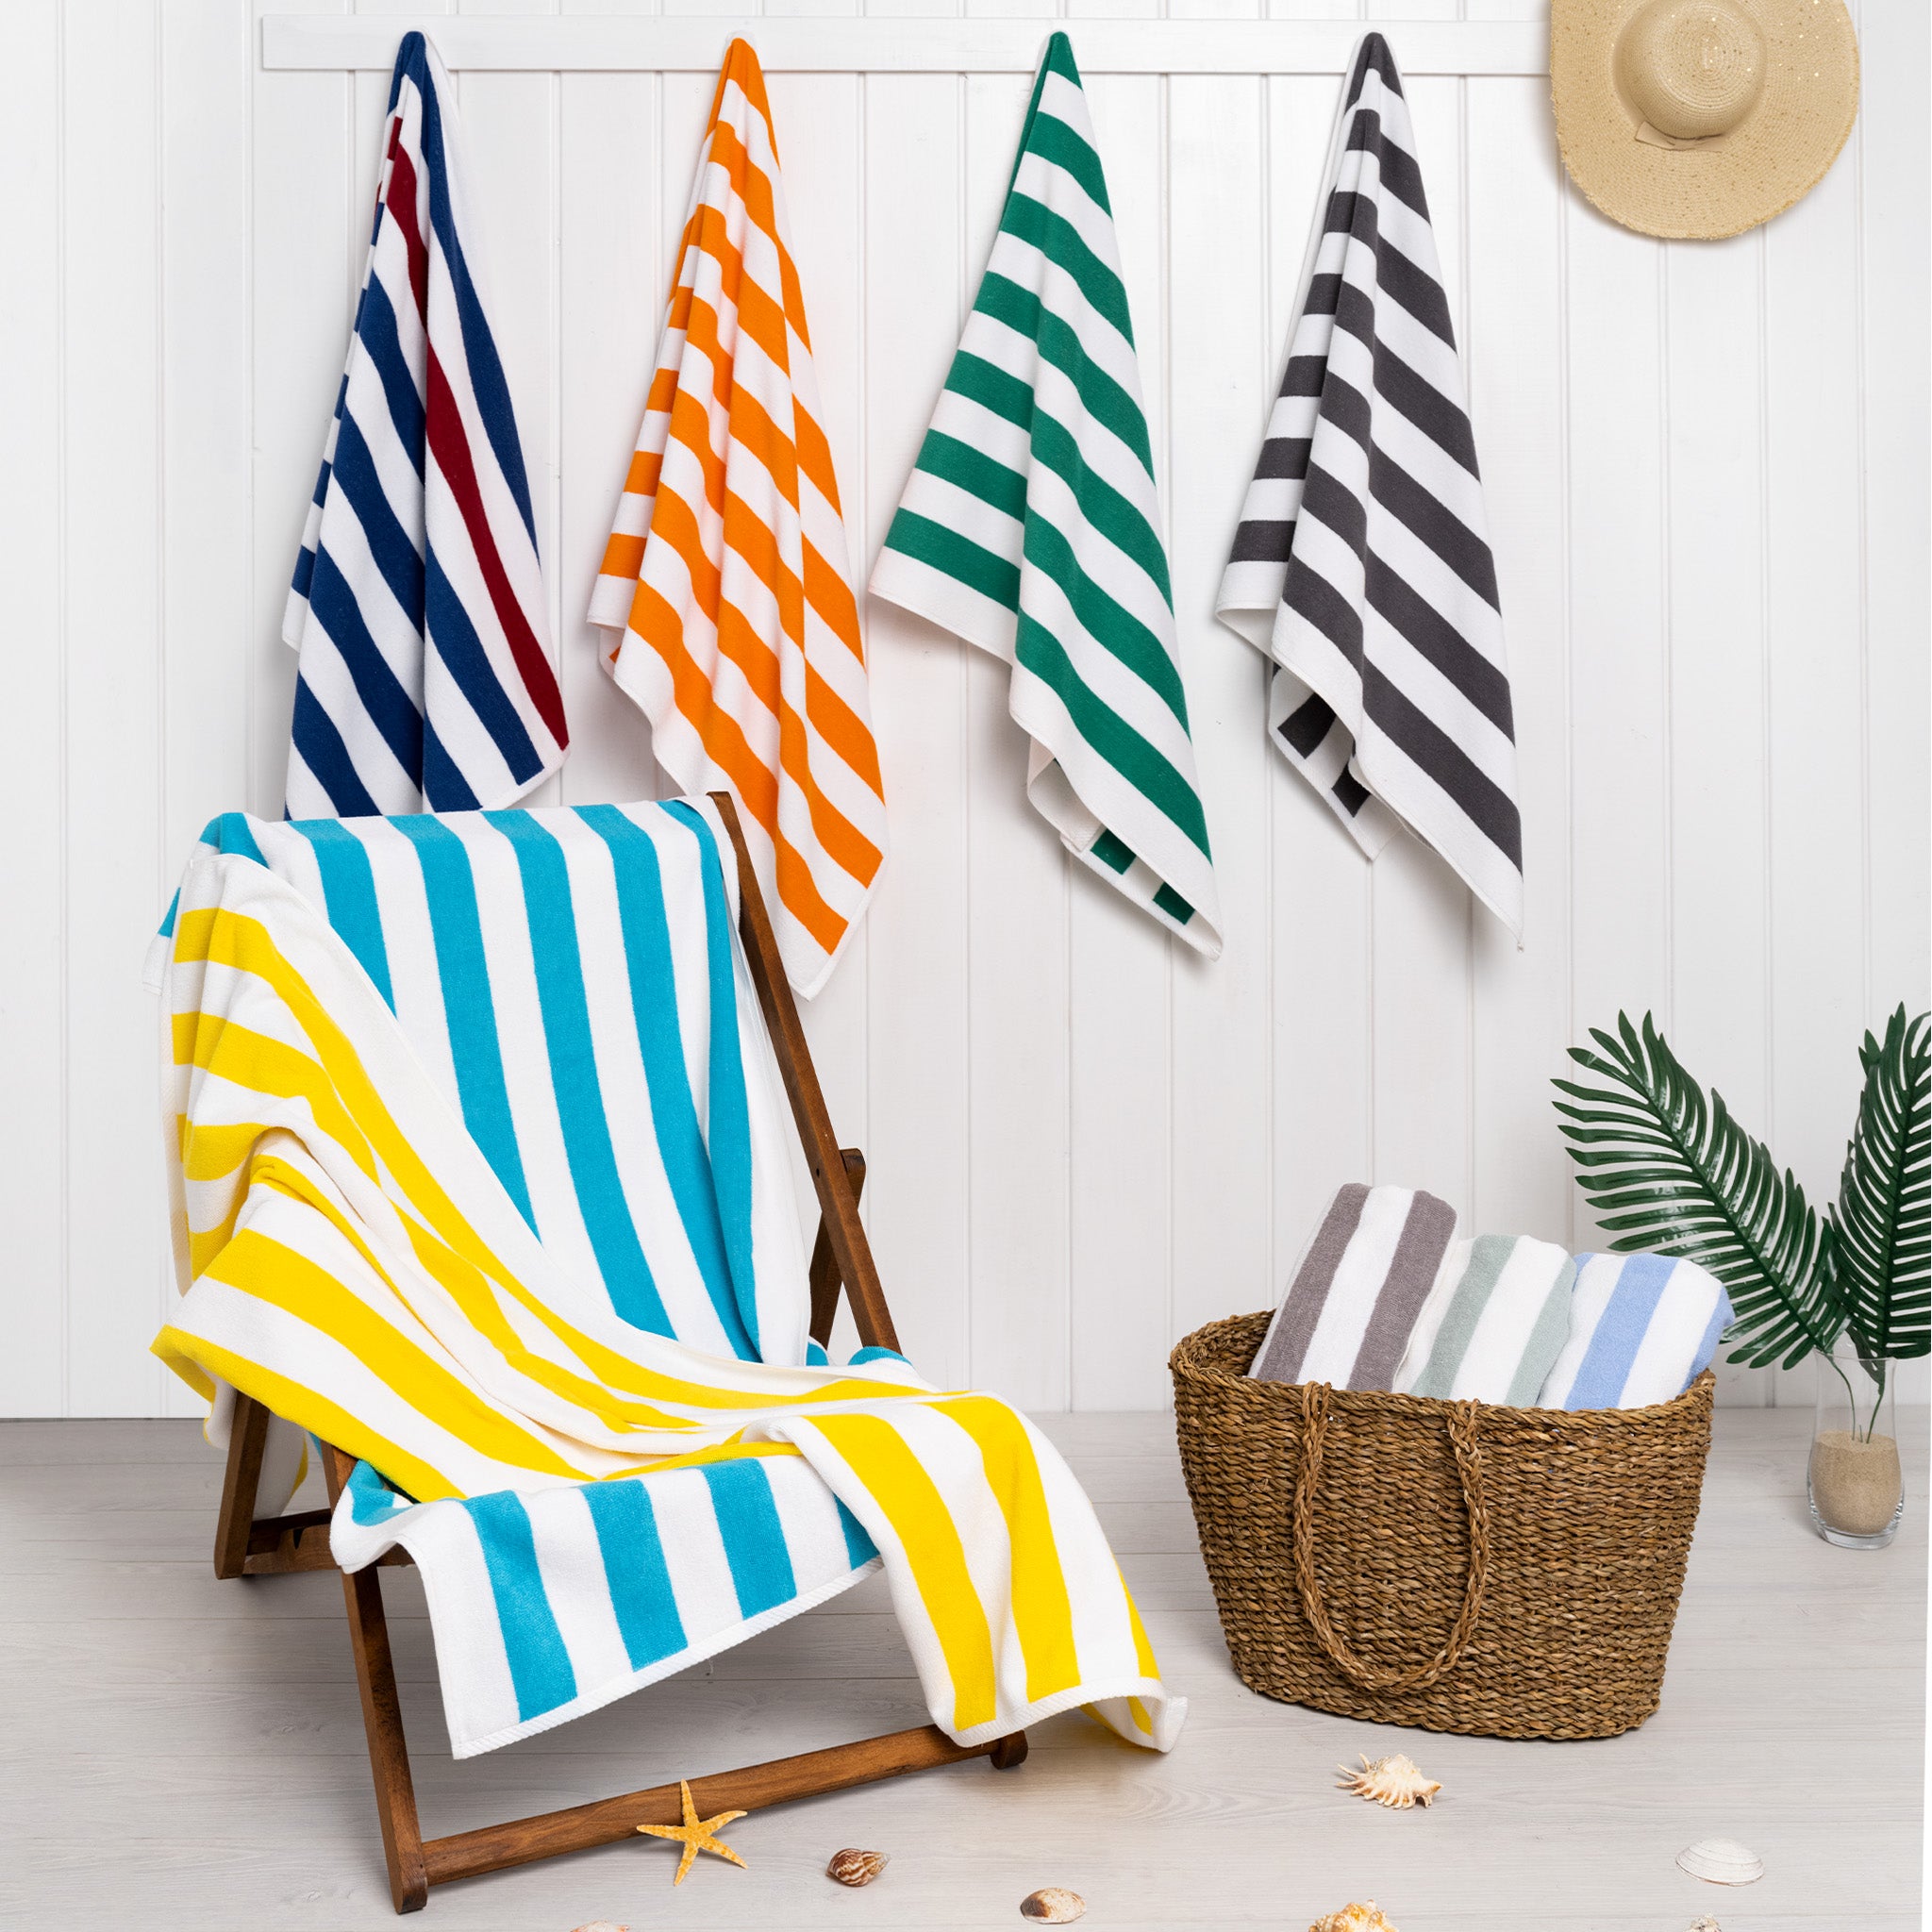 American Soft Linen 100% Cotton 4 Pack Beach Towels Cabana Striped Pool Towels -navy-sky-8